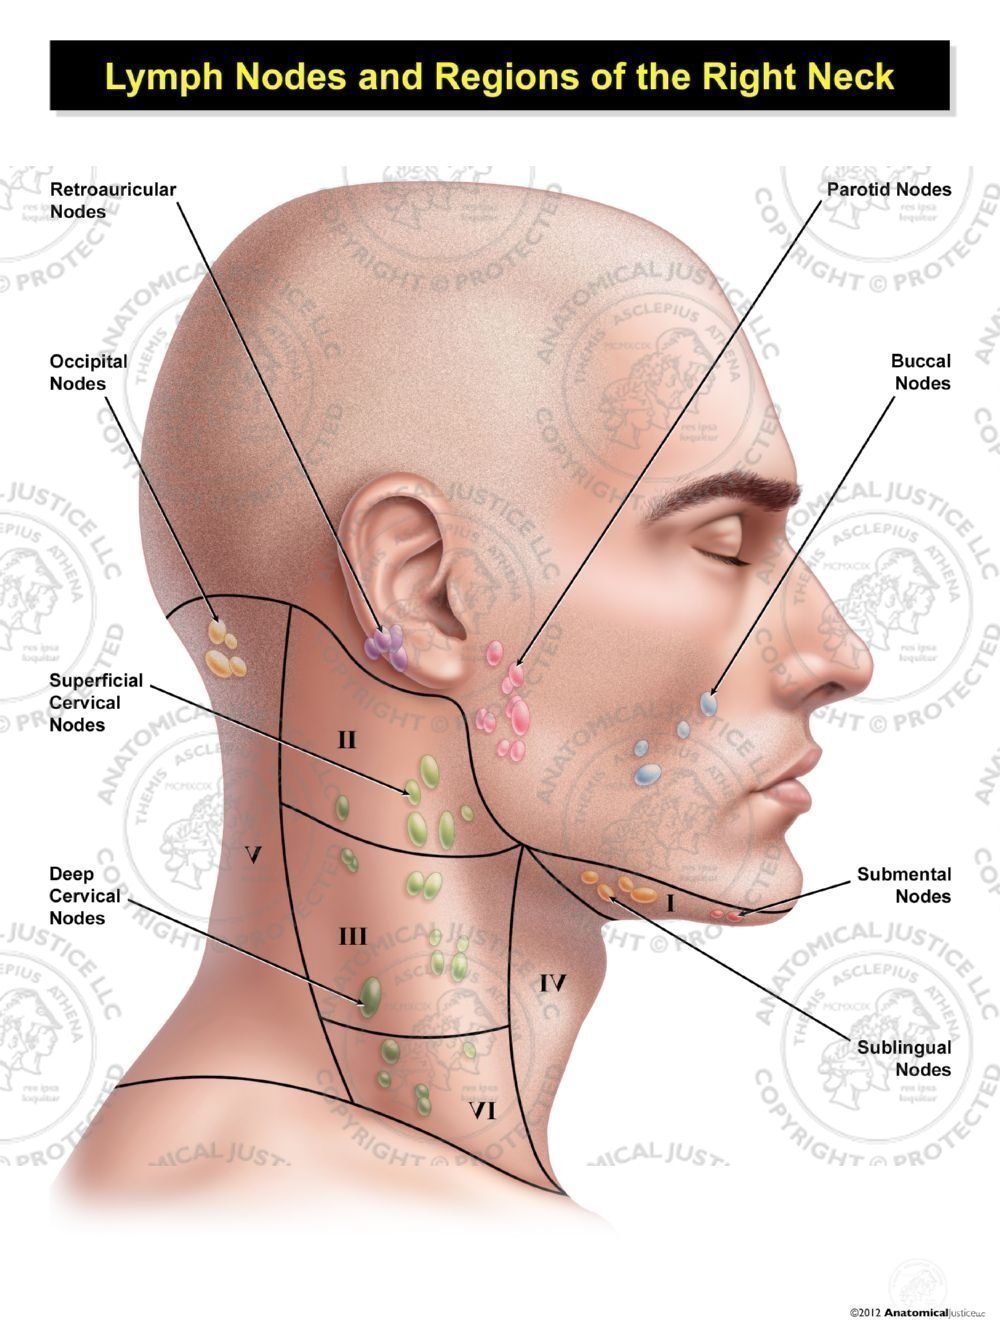 Male Right Lymph Nodes and Regions of the Neck